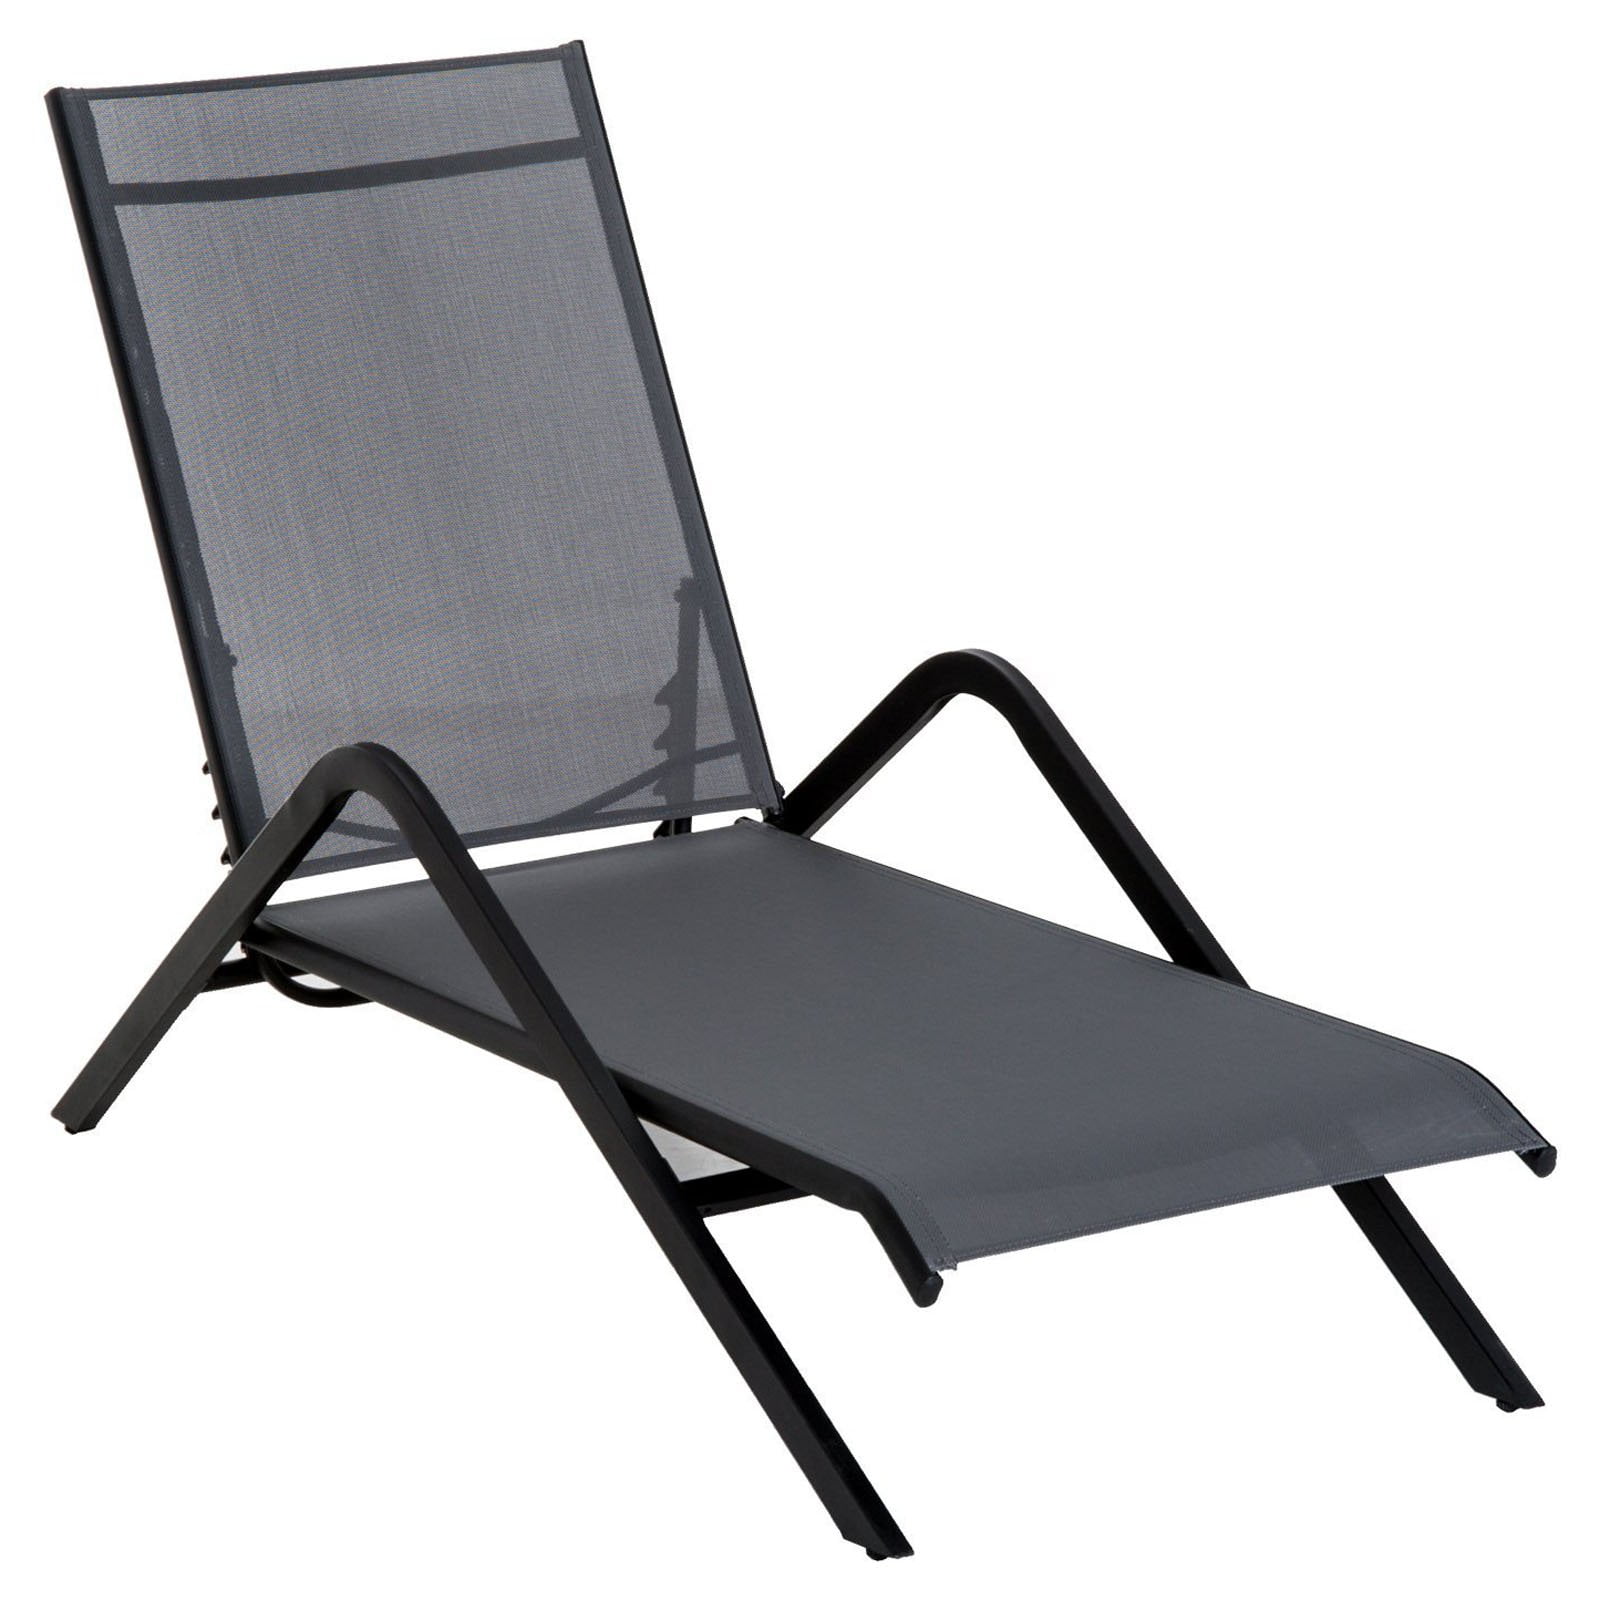 Modern Folding Patio Chairs Walmart for Simple Design